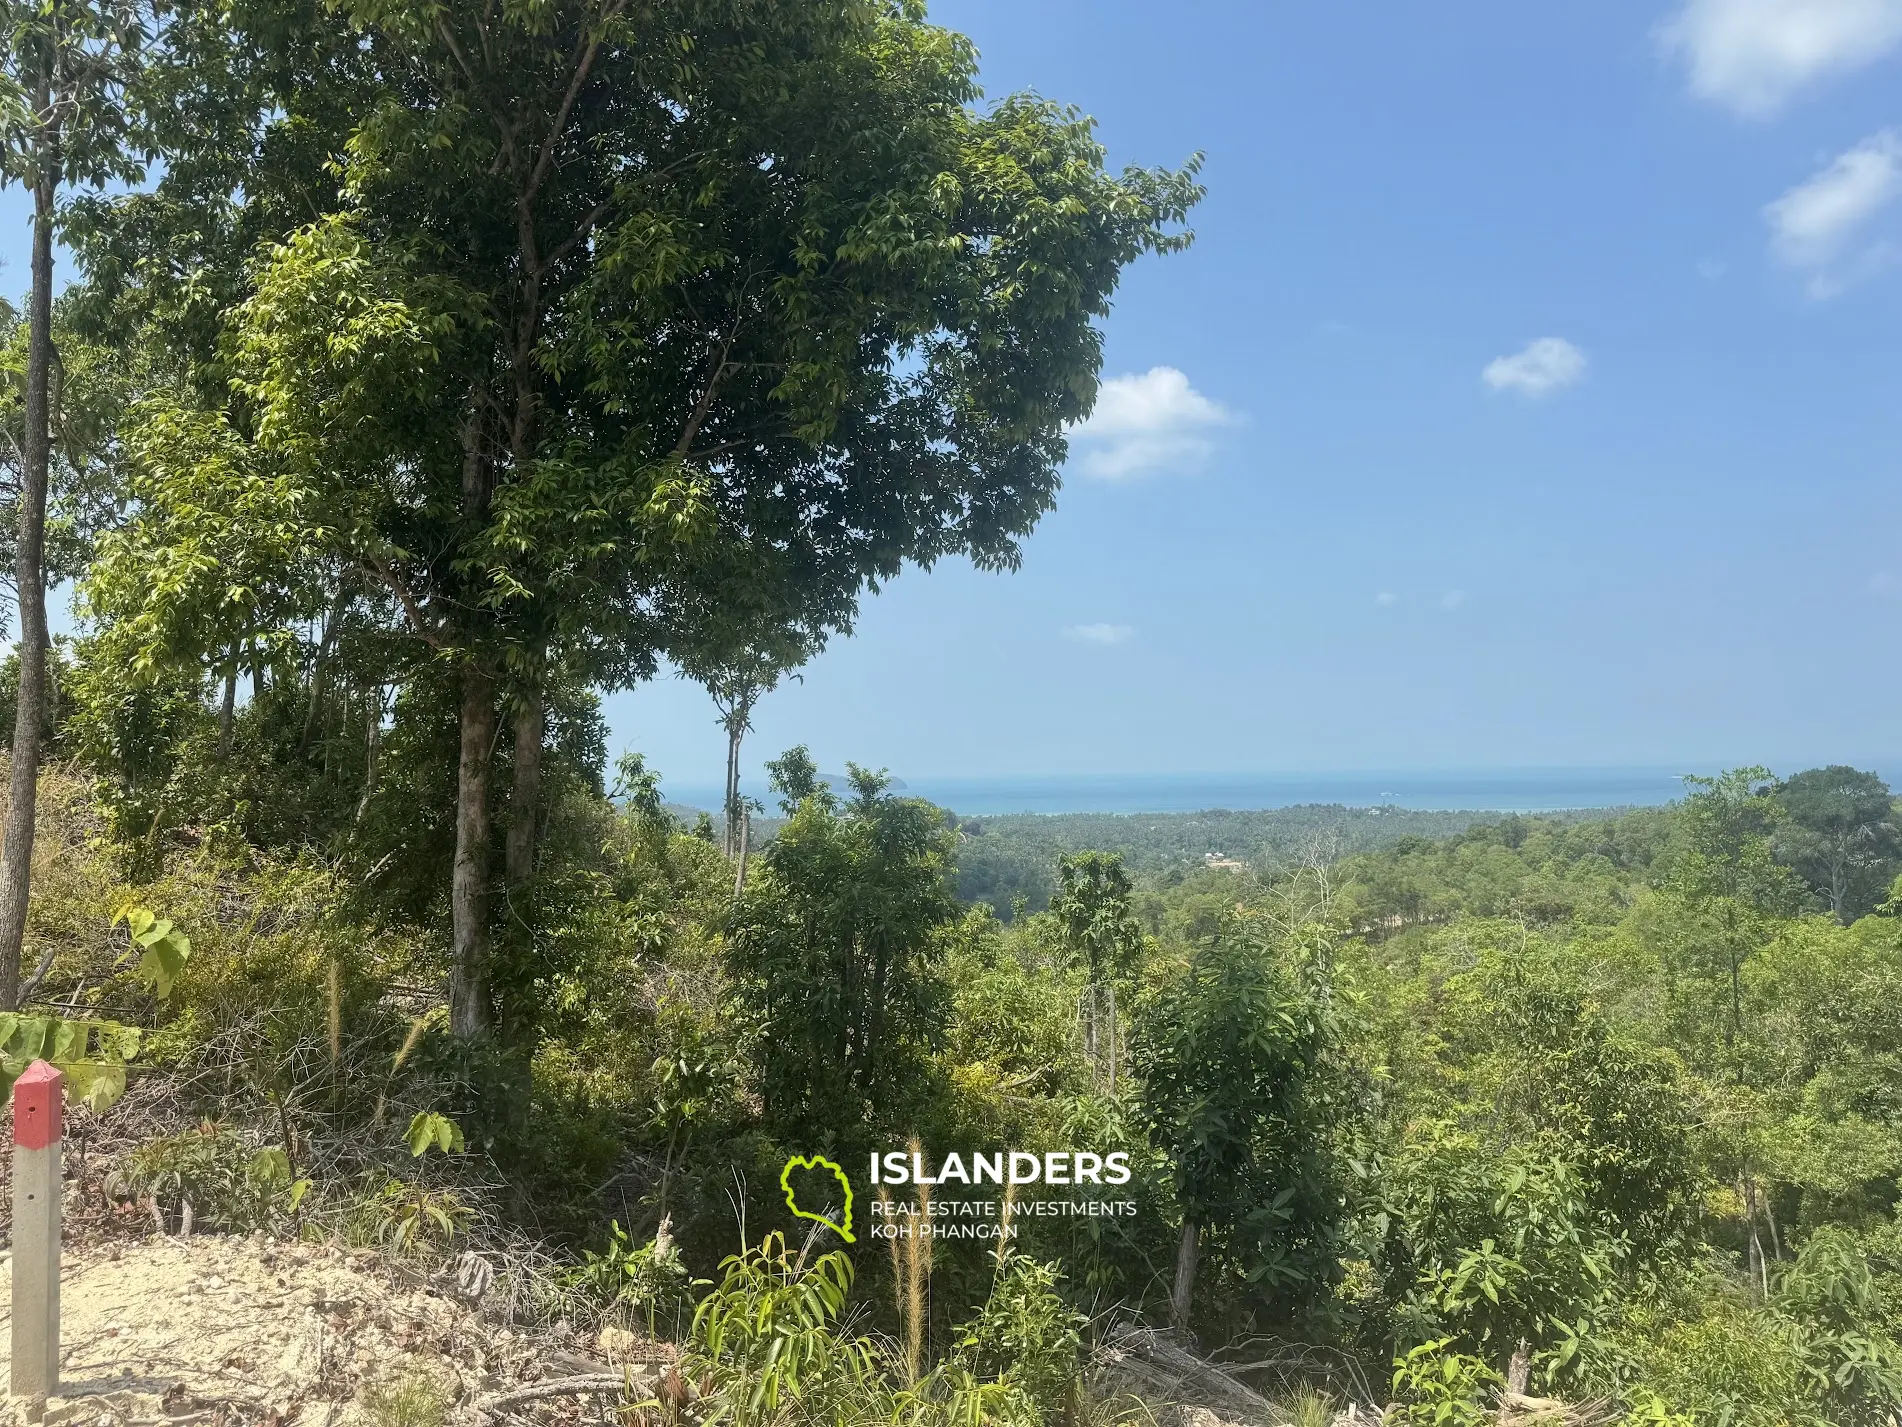 Nice seaview and jungleview land with good potential in Sritanu (dirty road, no electricity), 1,595 Rai